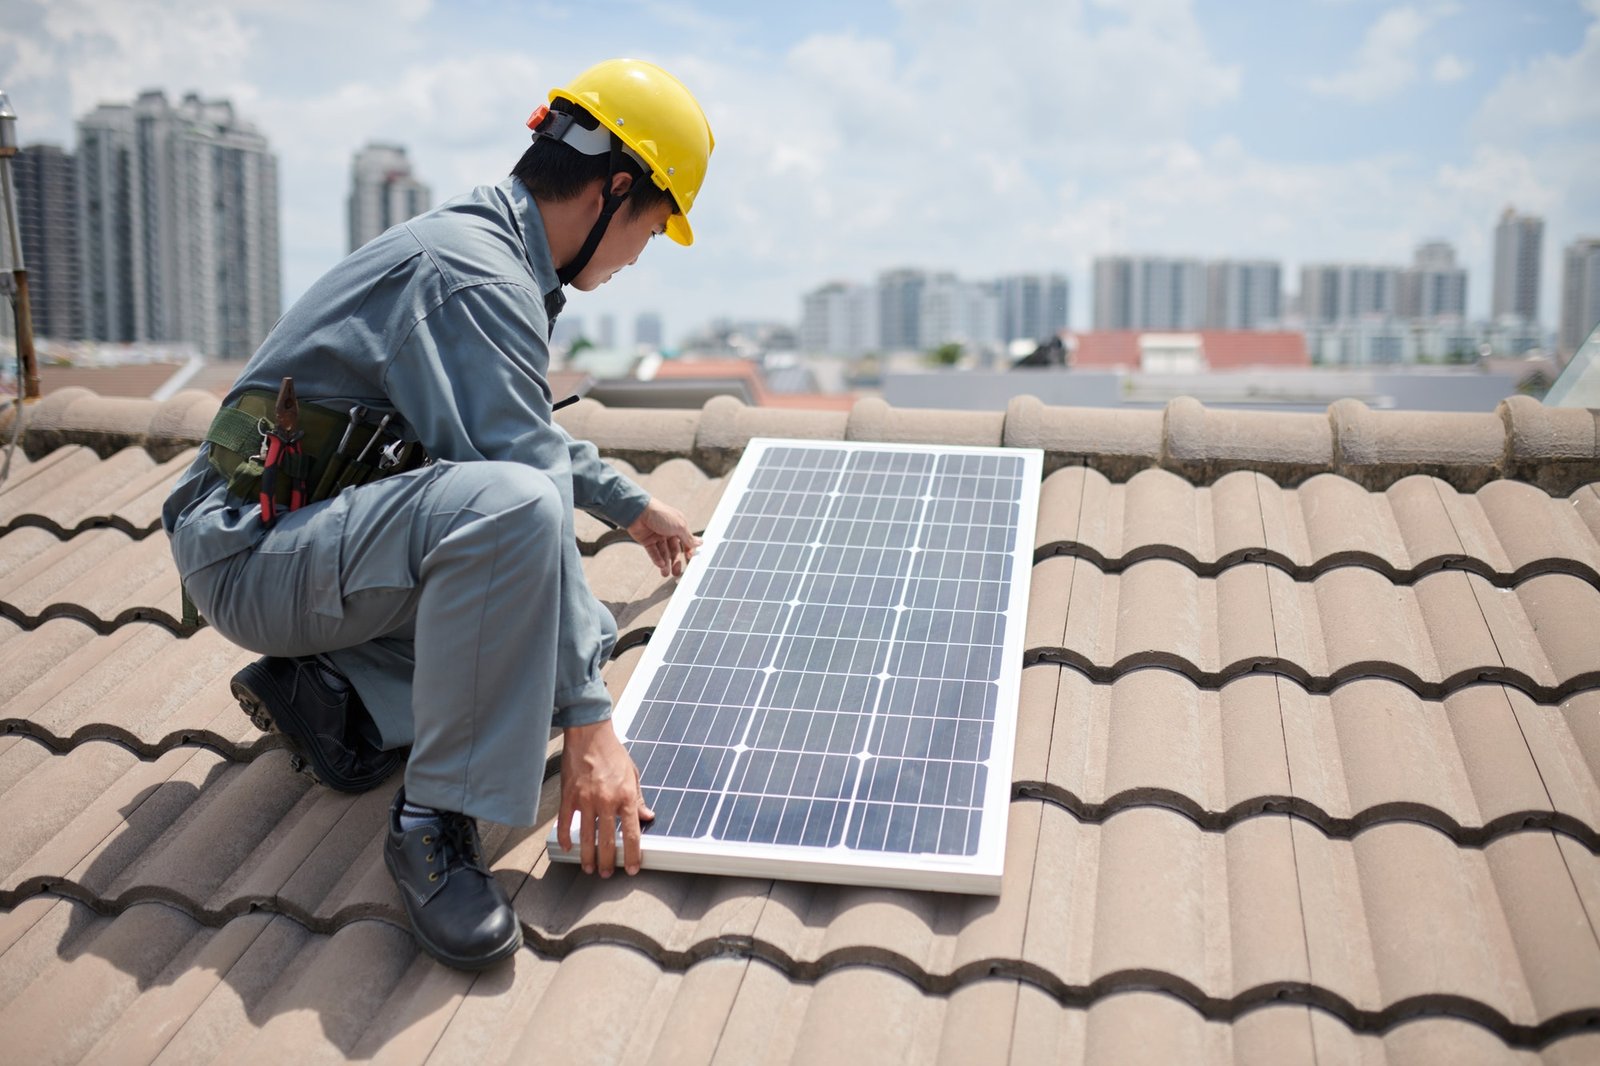 Worker Installing Solar Panels on Roof